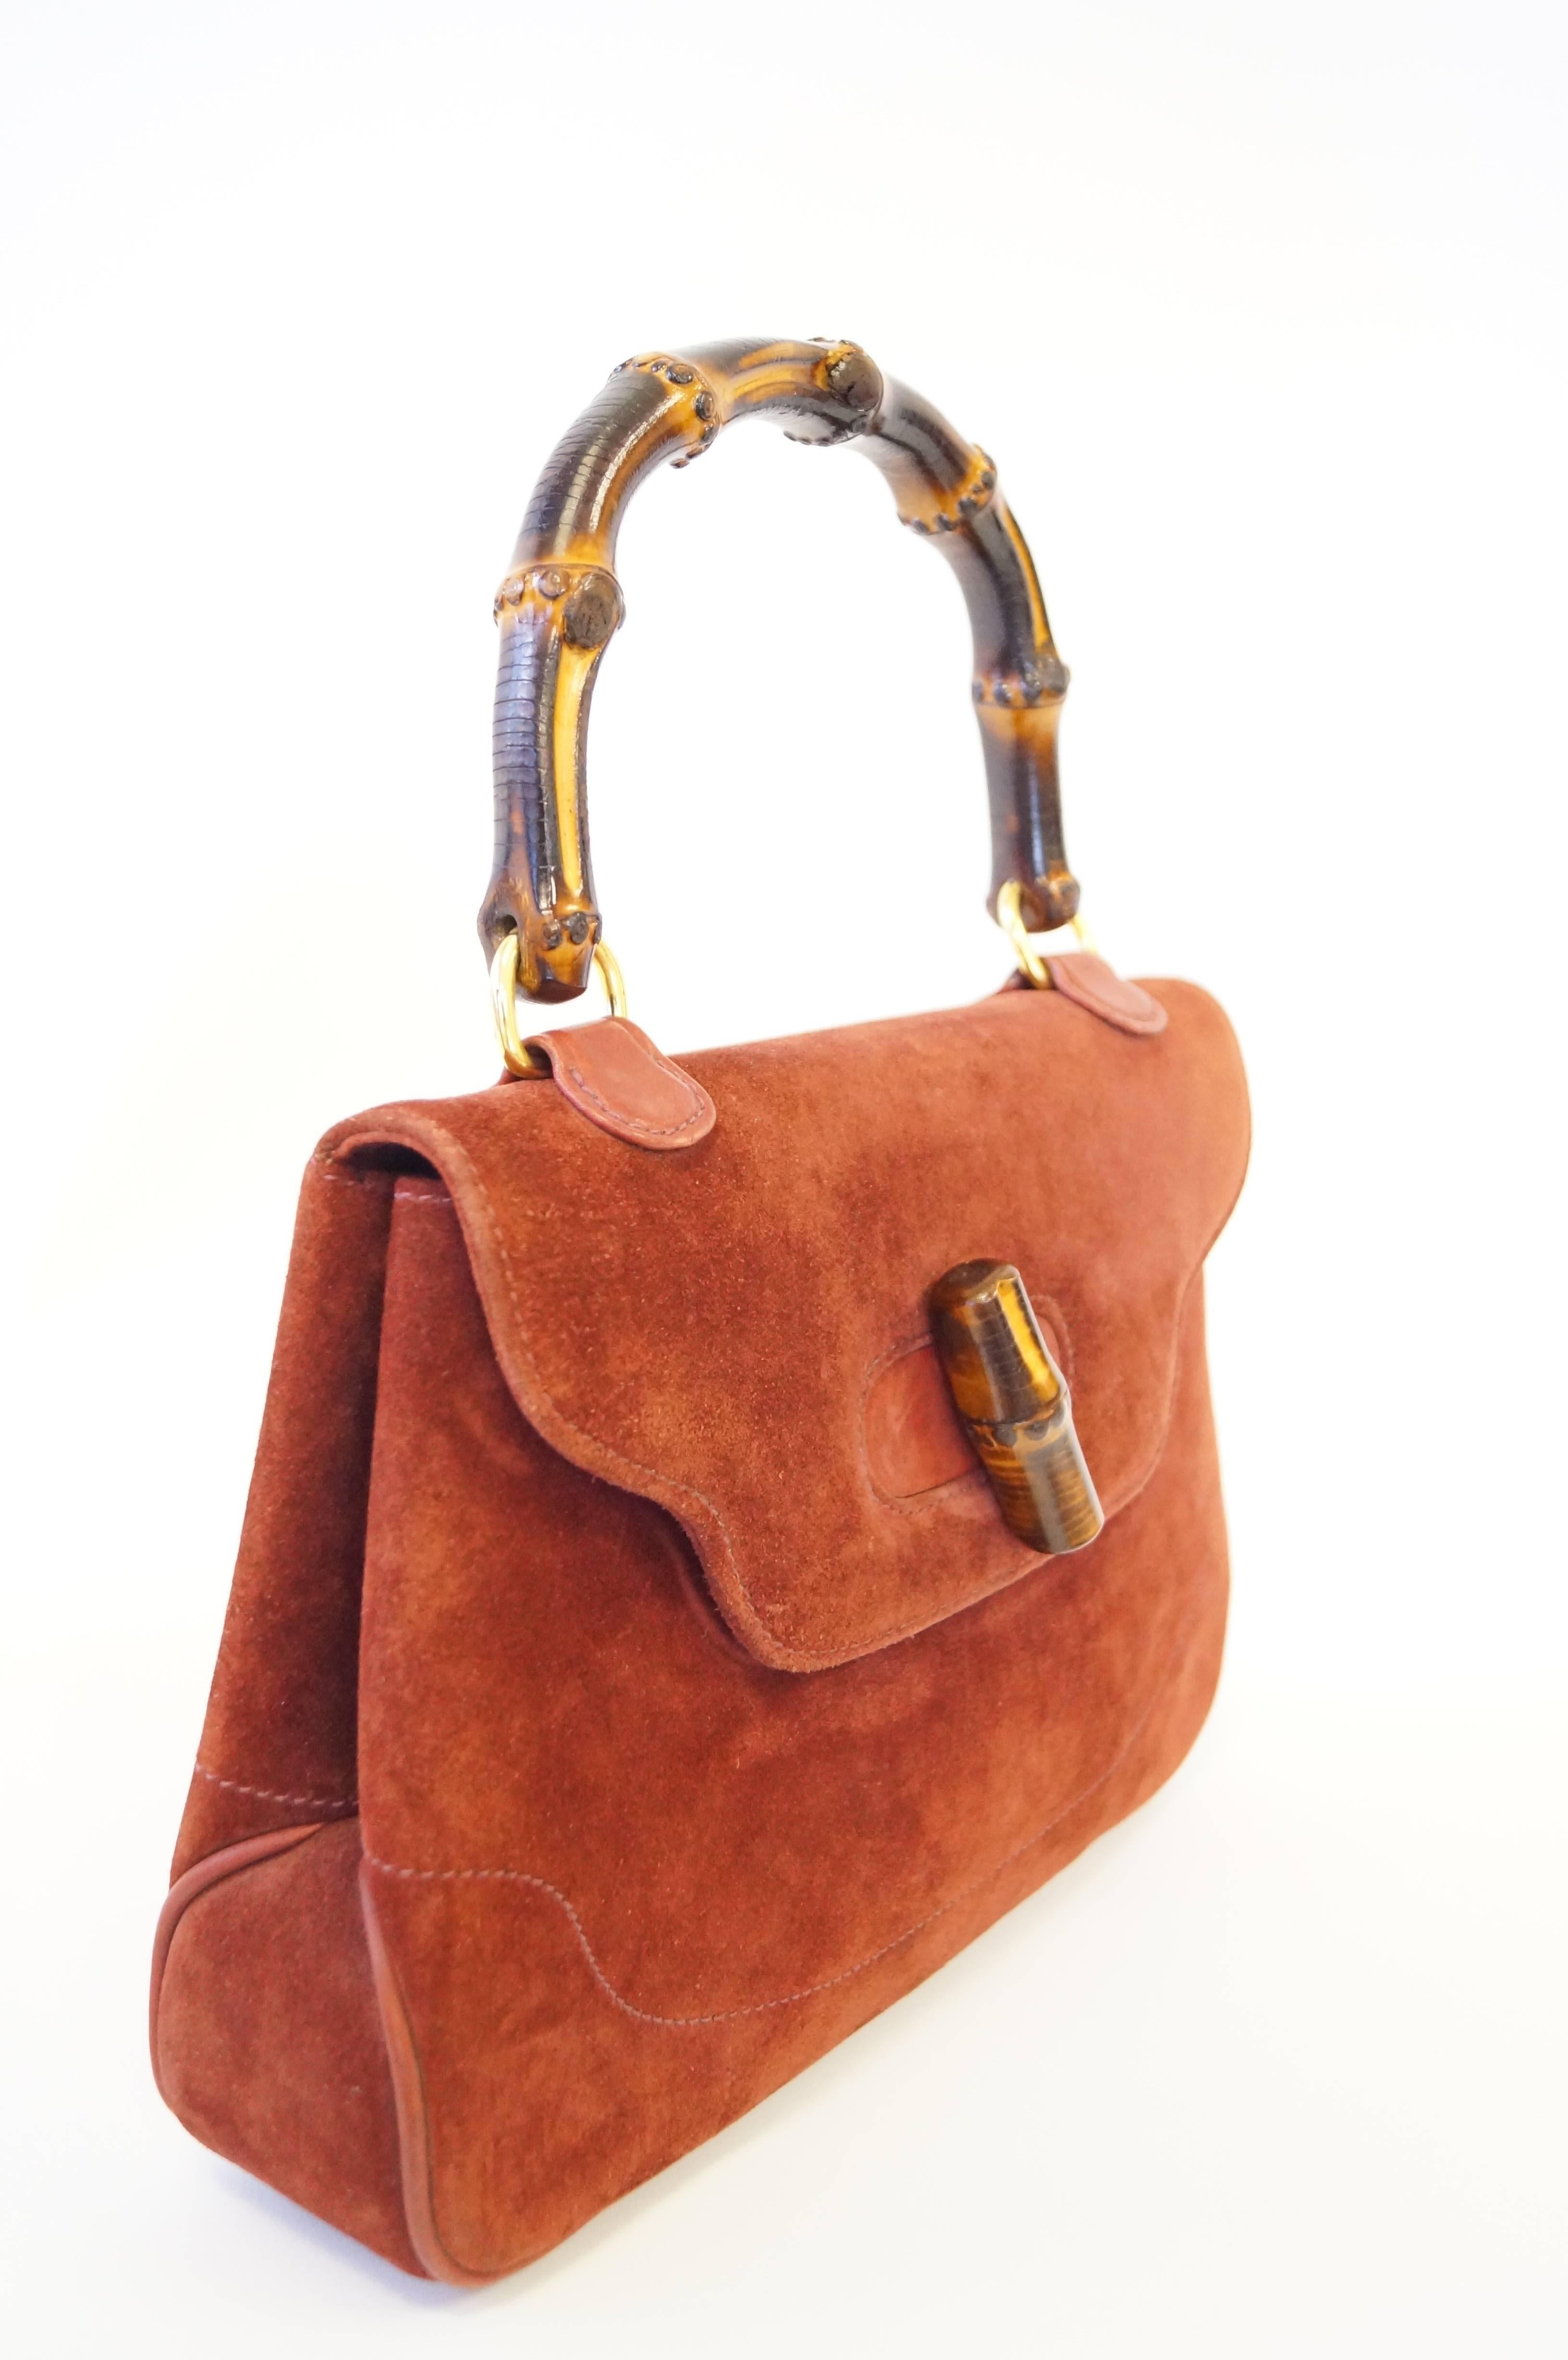 Rare and Iconic!

This gorgeous 1970's handbag in one of Gucci's most famous designs! The rust colored suede purse has a saddlebag construction with a flap that lays over the front of the purse. The espresso bamboo handle of the purse curves gently